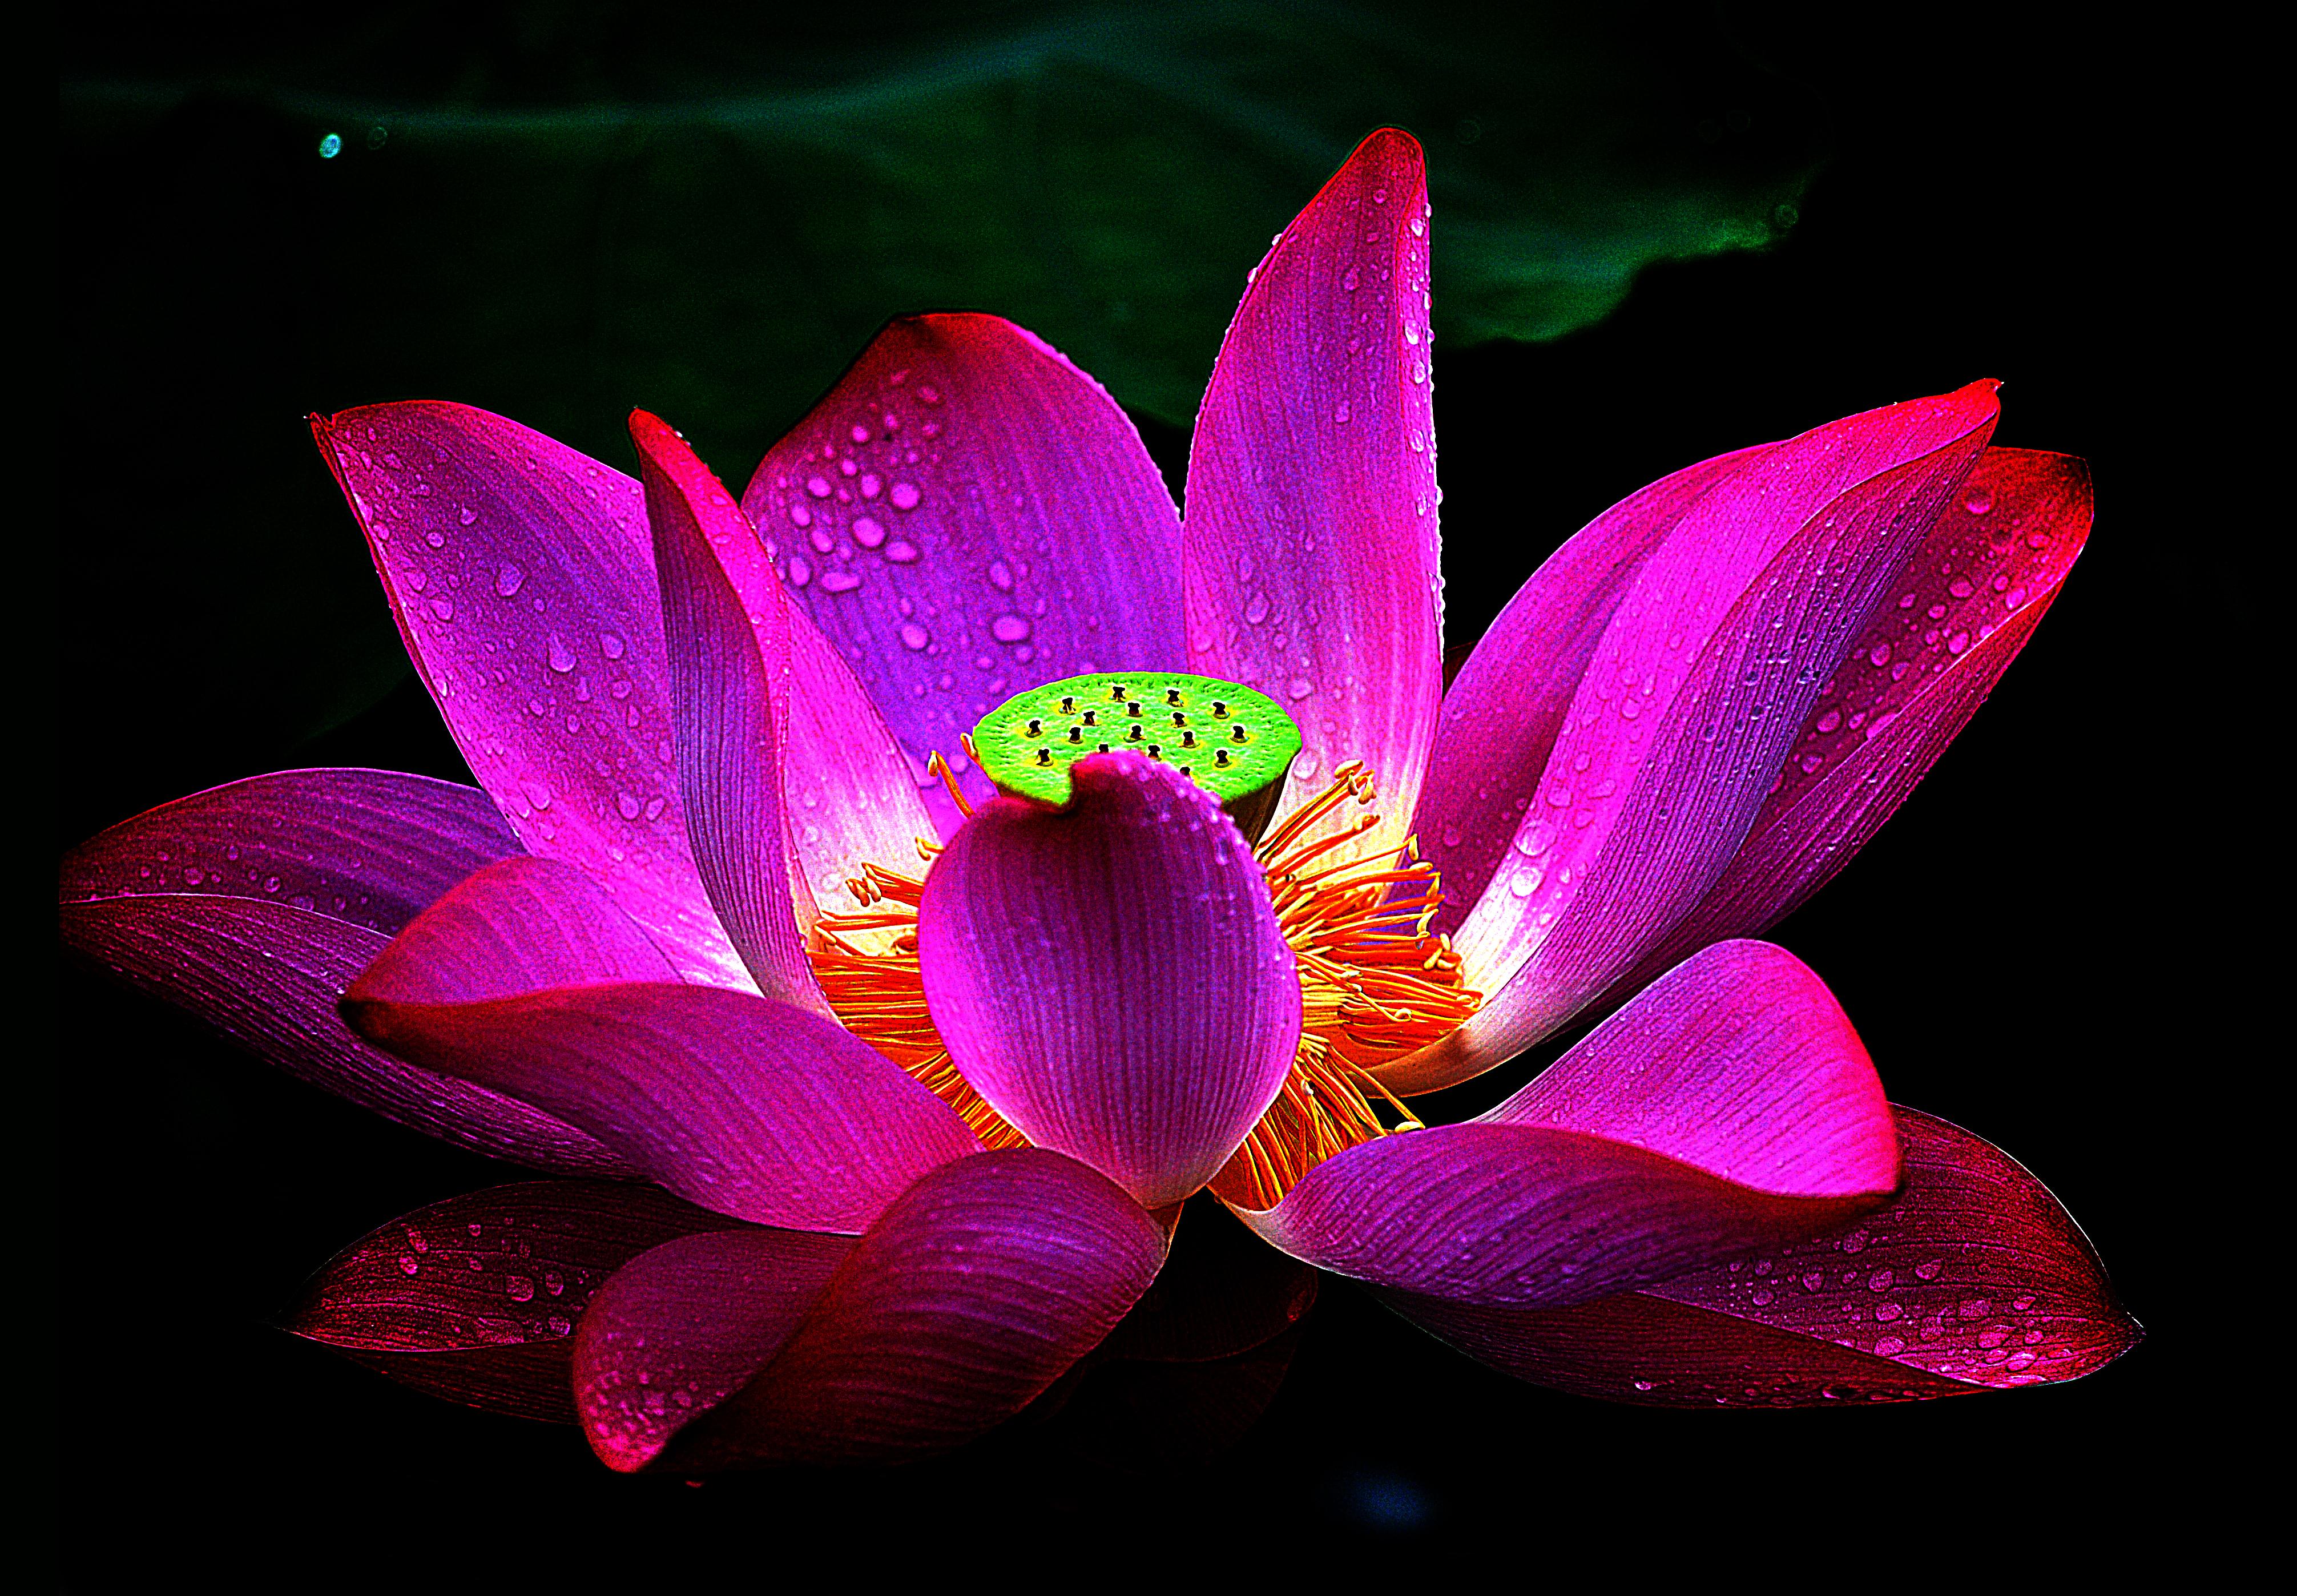 4024 x 2796 · jpeg - Lotus Flower Wallpapers, Pictures, Images